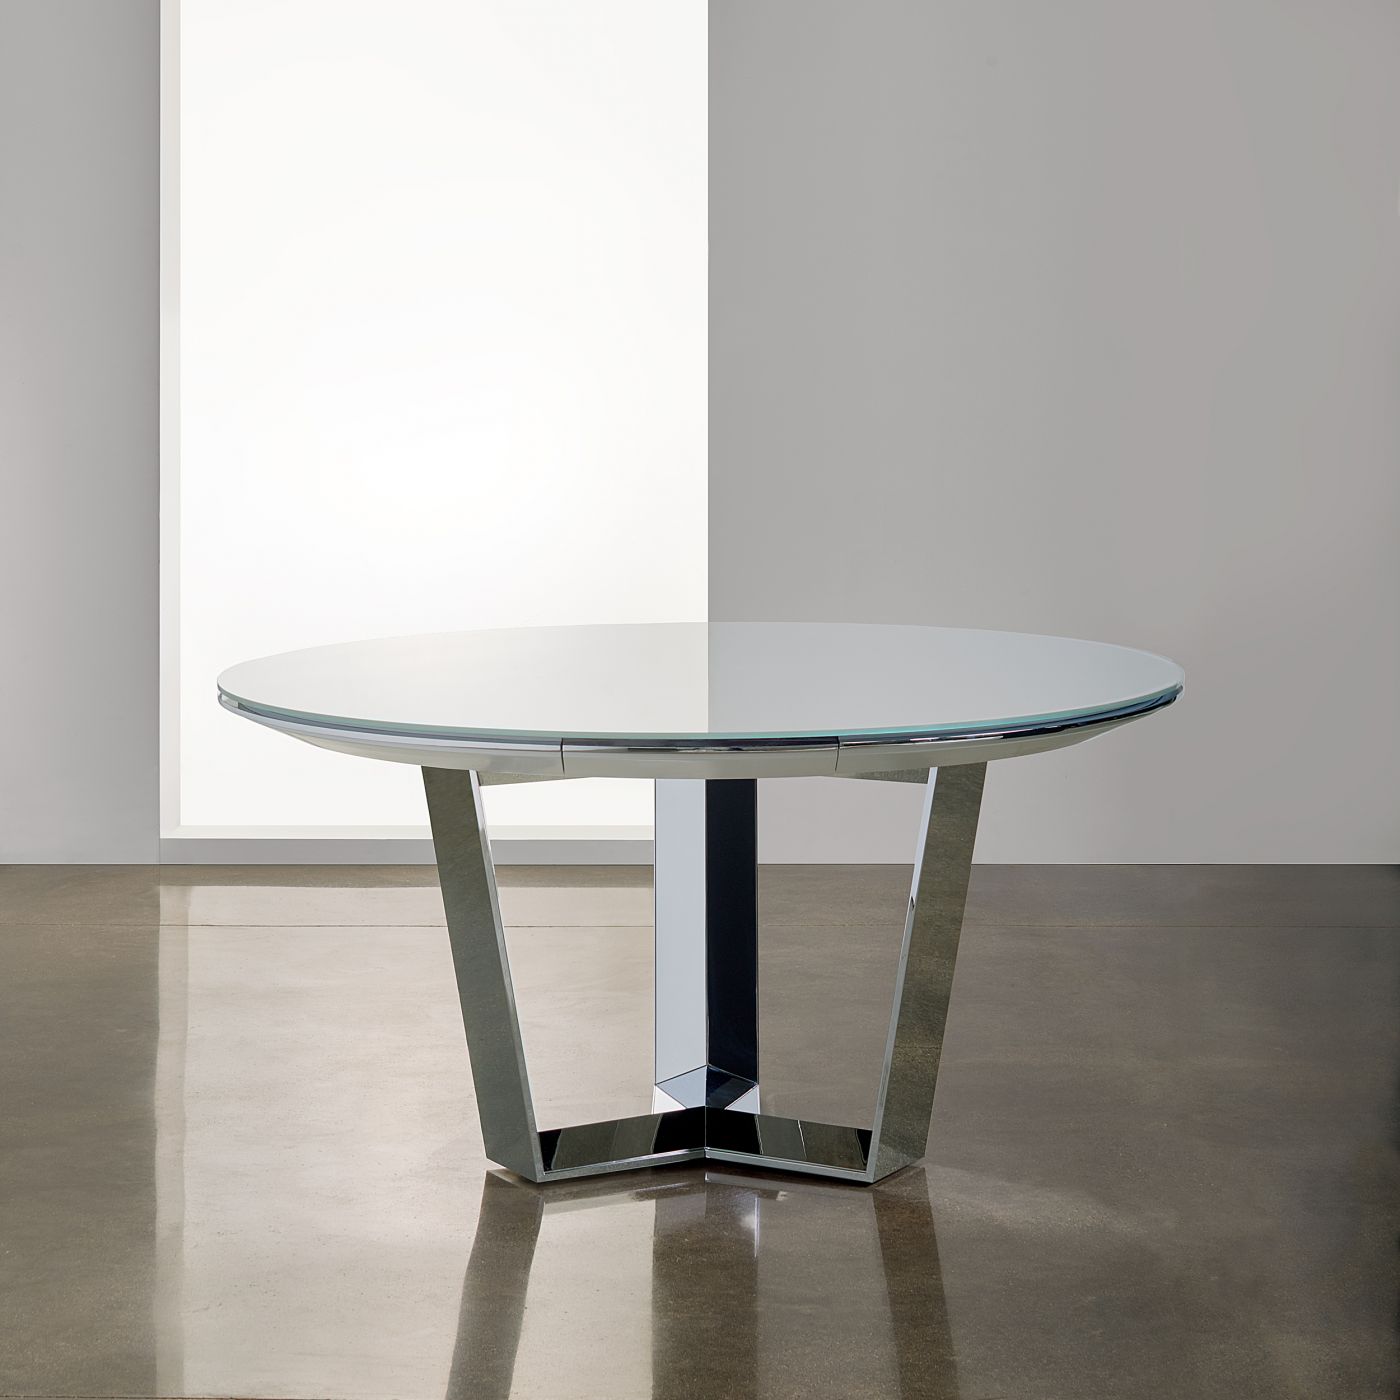 Beautiful and functional, the Mesa Triad table is thoughtfully-engineered with cabling cleanly concealed within the metal base.